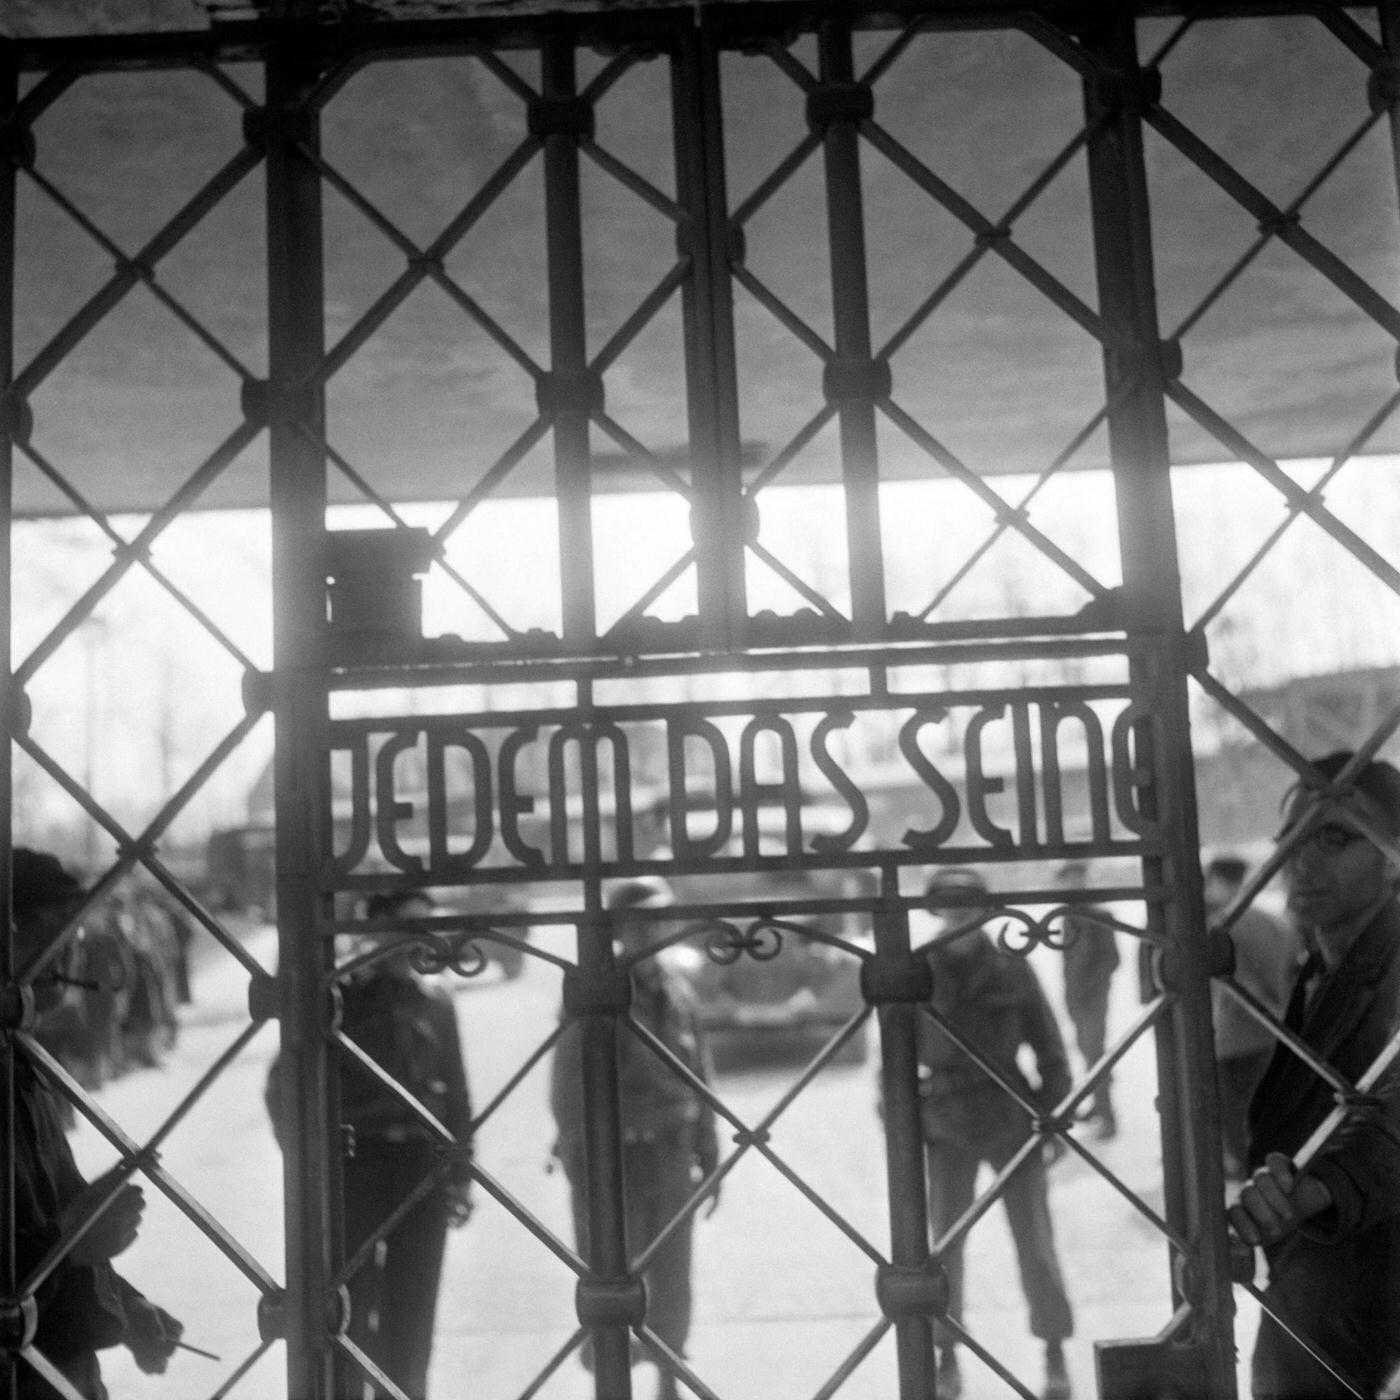 Prisoners and US army soldiers stand behind the gate of Buchenwald concentration camp with the inscription "Jedem das seine" (to each his own), April 1945.